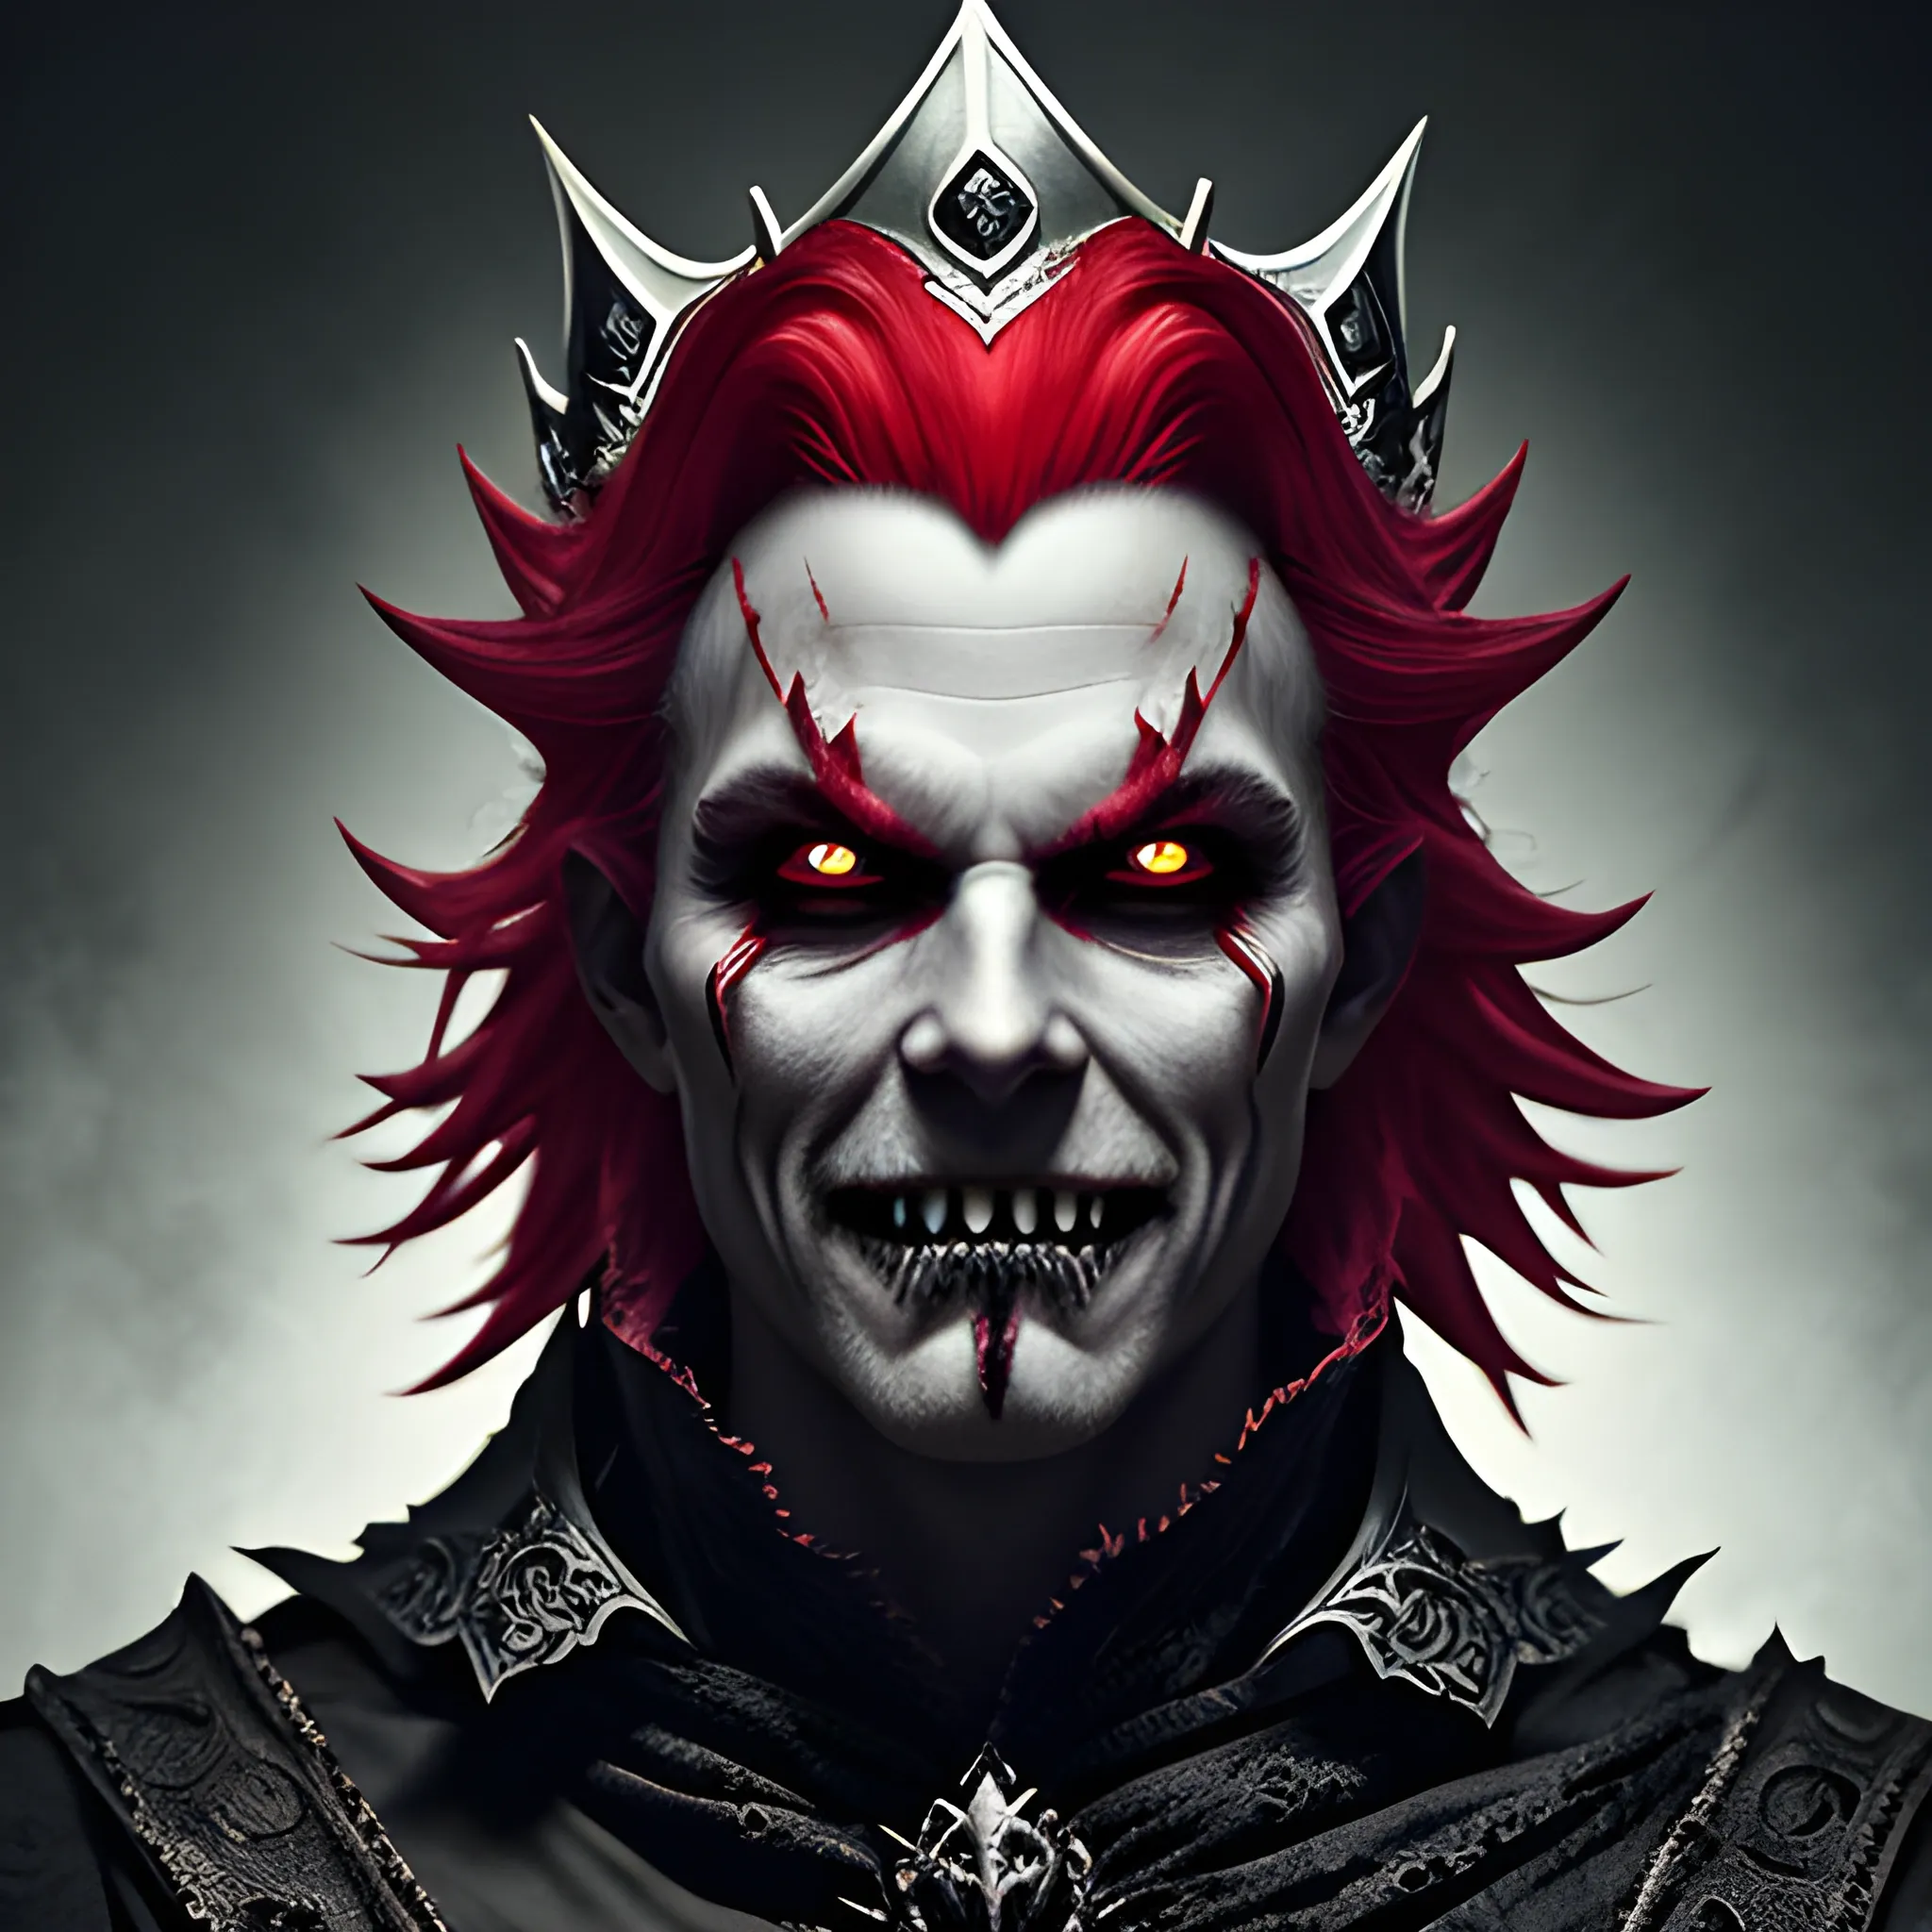 fantasy image of the evil king with a crown covering its eyes, half body, ominous smile, dimmed lighting, red painted hair, evil grim, bokeh lighting, sharp teeth, eyes covered
